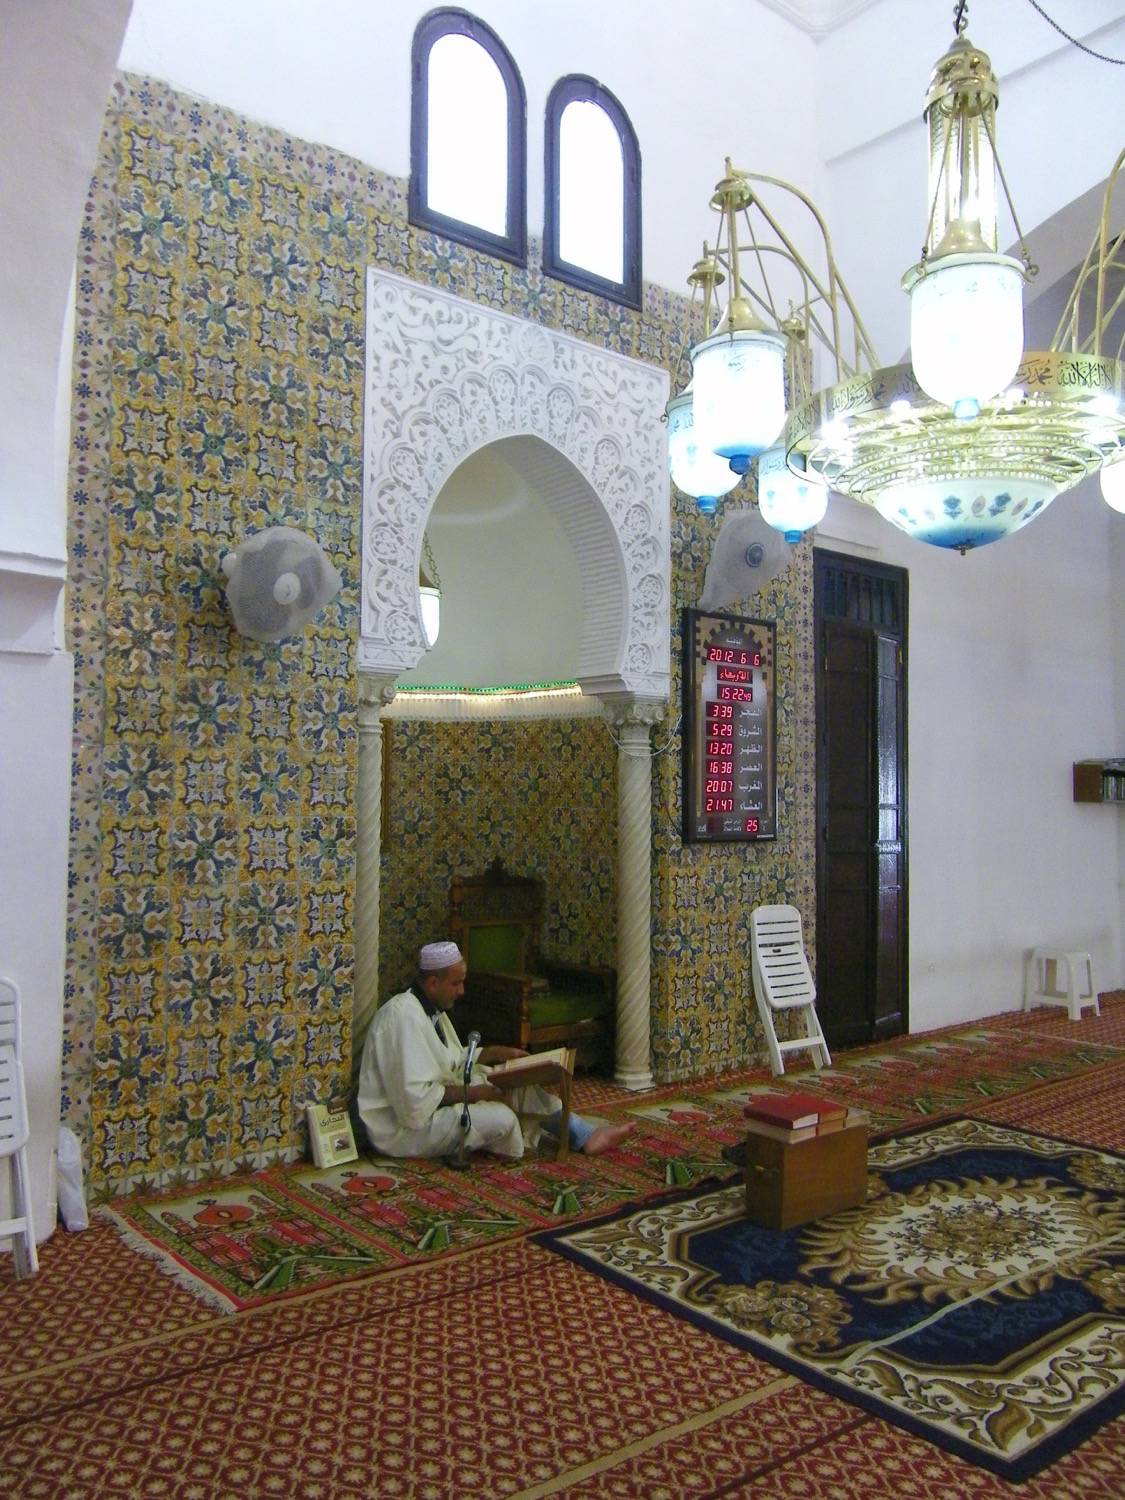 Jami' al-Kabir (Algiers) - Interior view of the ceramic tile (faience) decoration and stucco decorating the mihrab